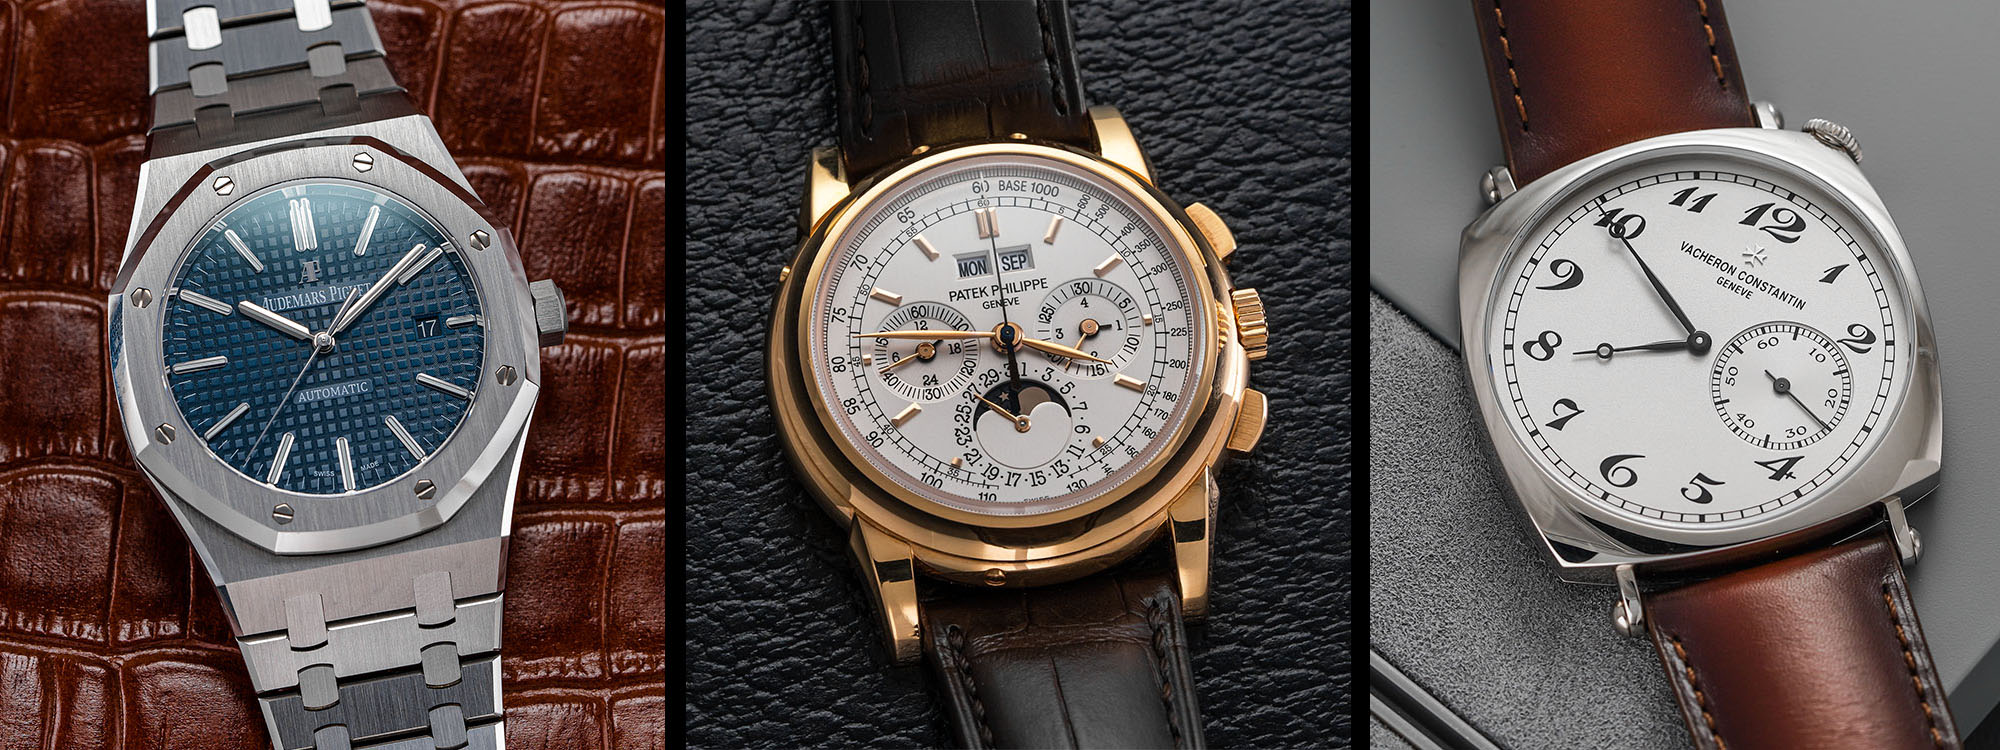 Why are These Brands the Holy Trinity of Watches? Exploring Patek Philippe, Audemars Piguet and Vacheron Constantin